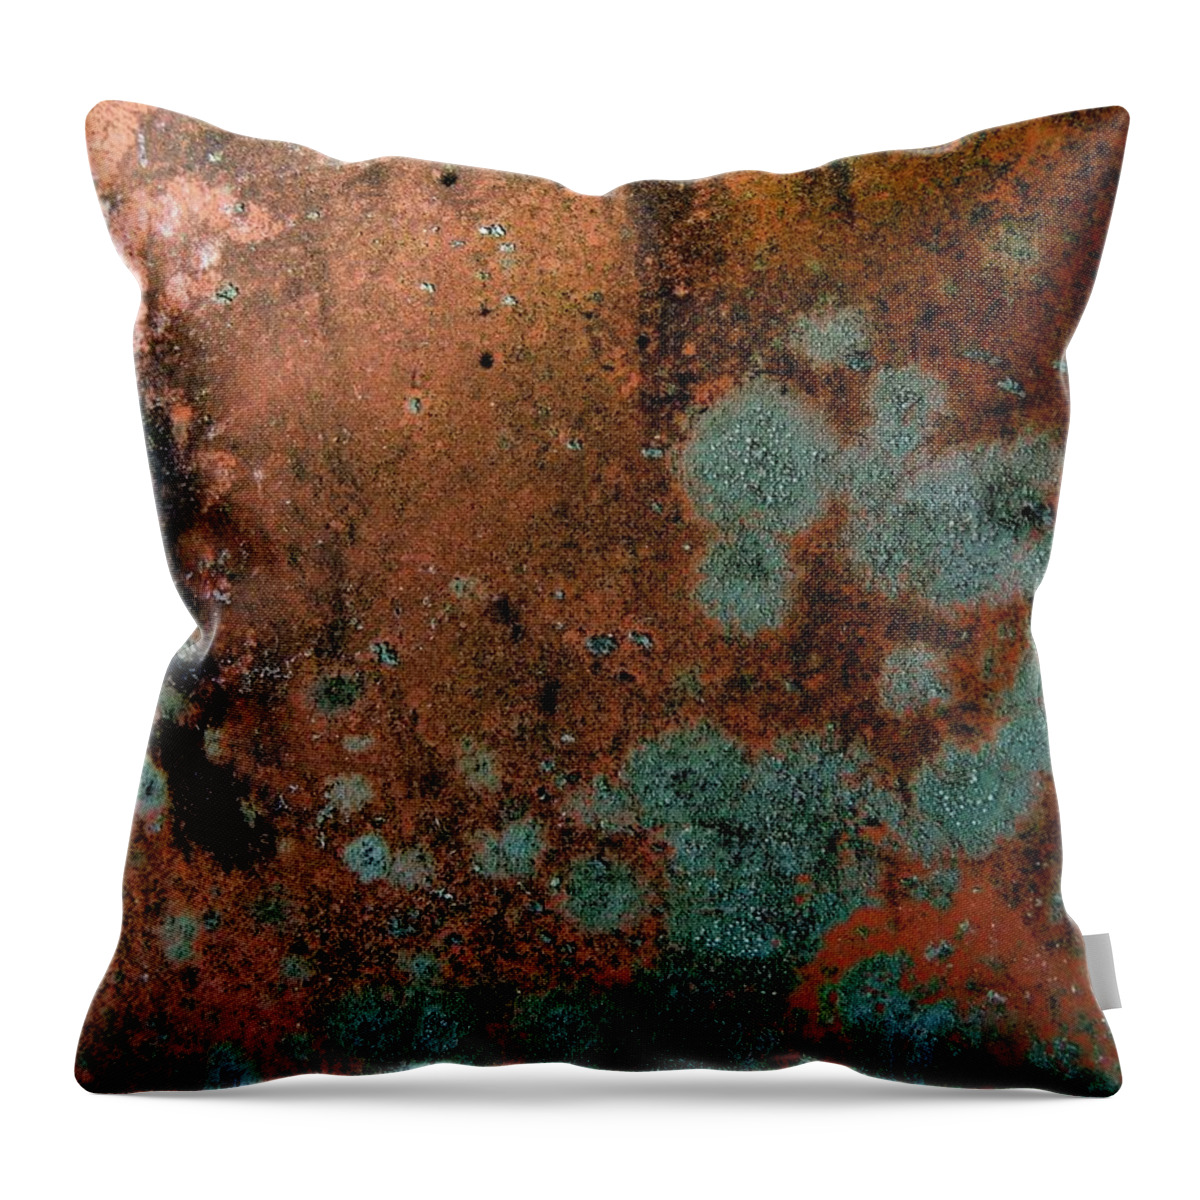 Lichen Throw Pillow featuring the photograph Lichen Abstract 1 by Denise Clark